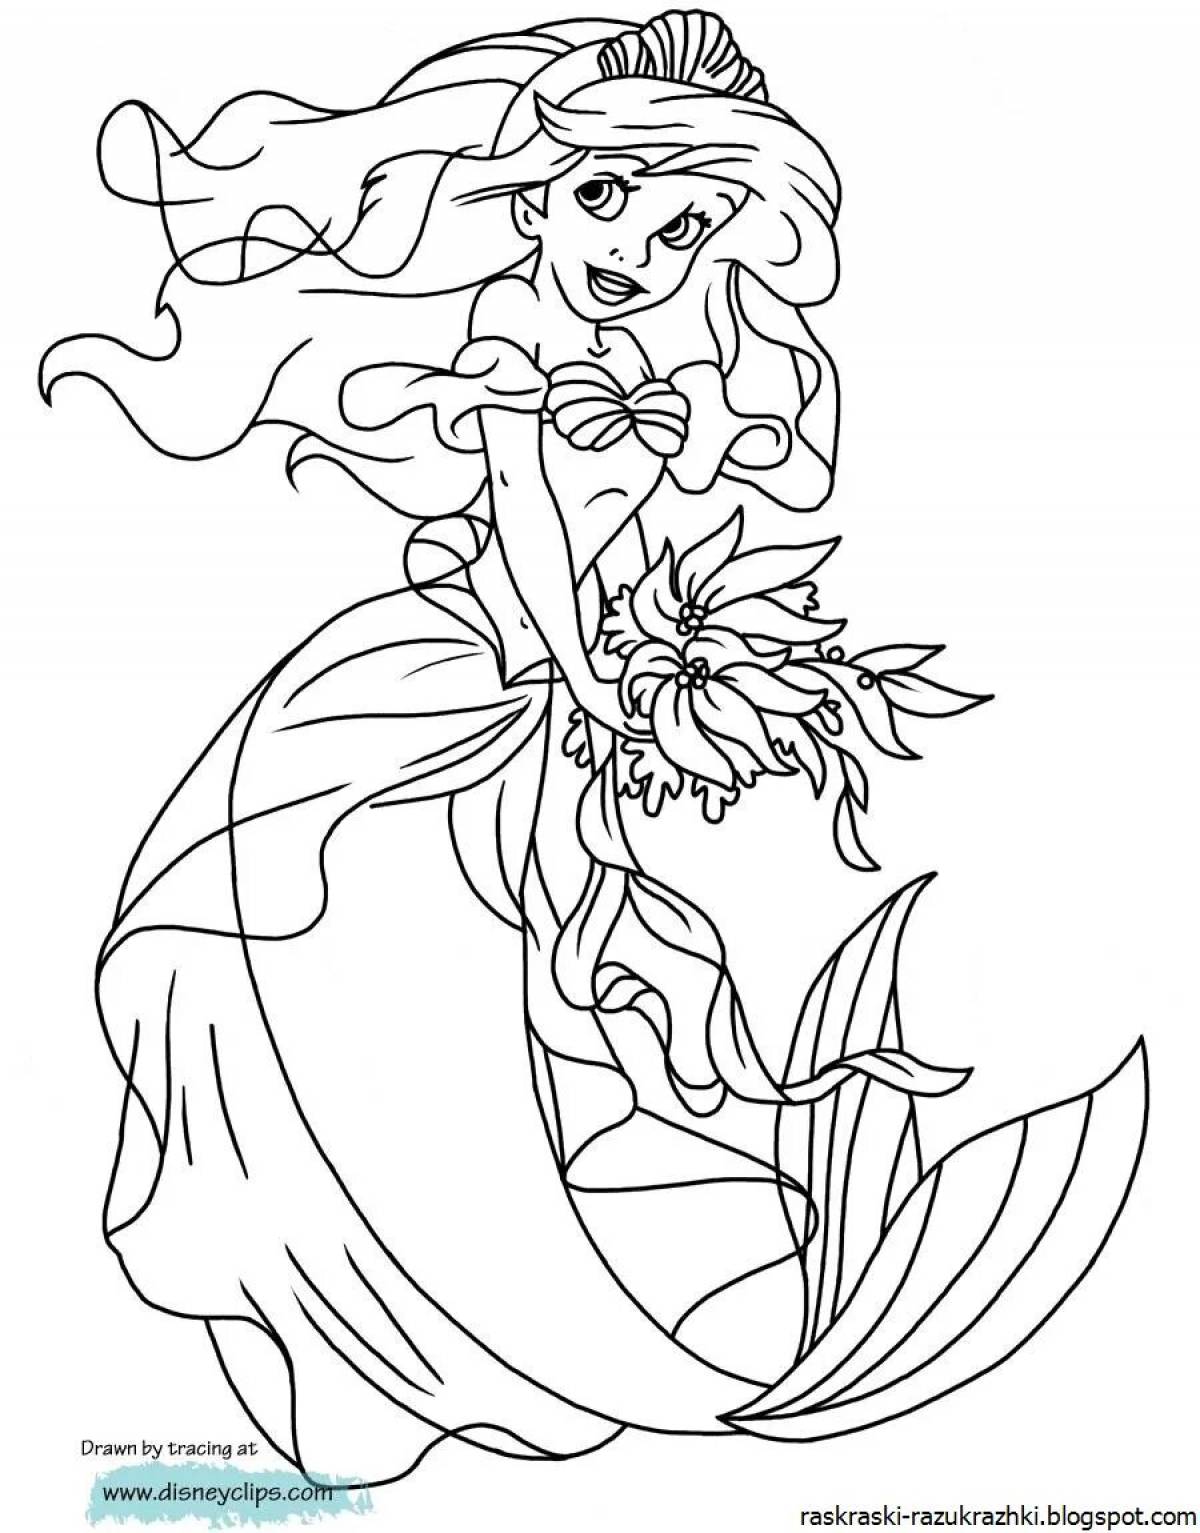 Live coloring for girls little mermaid